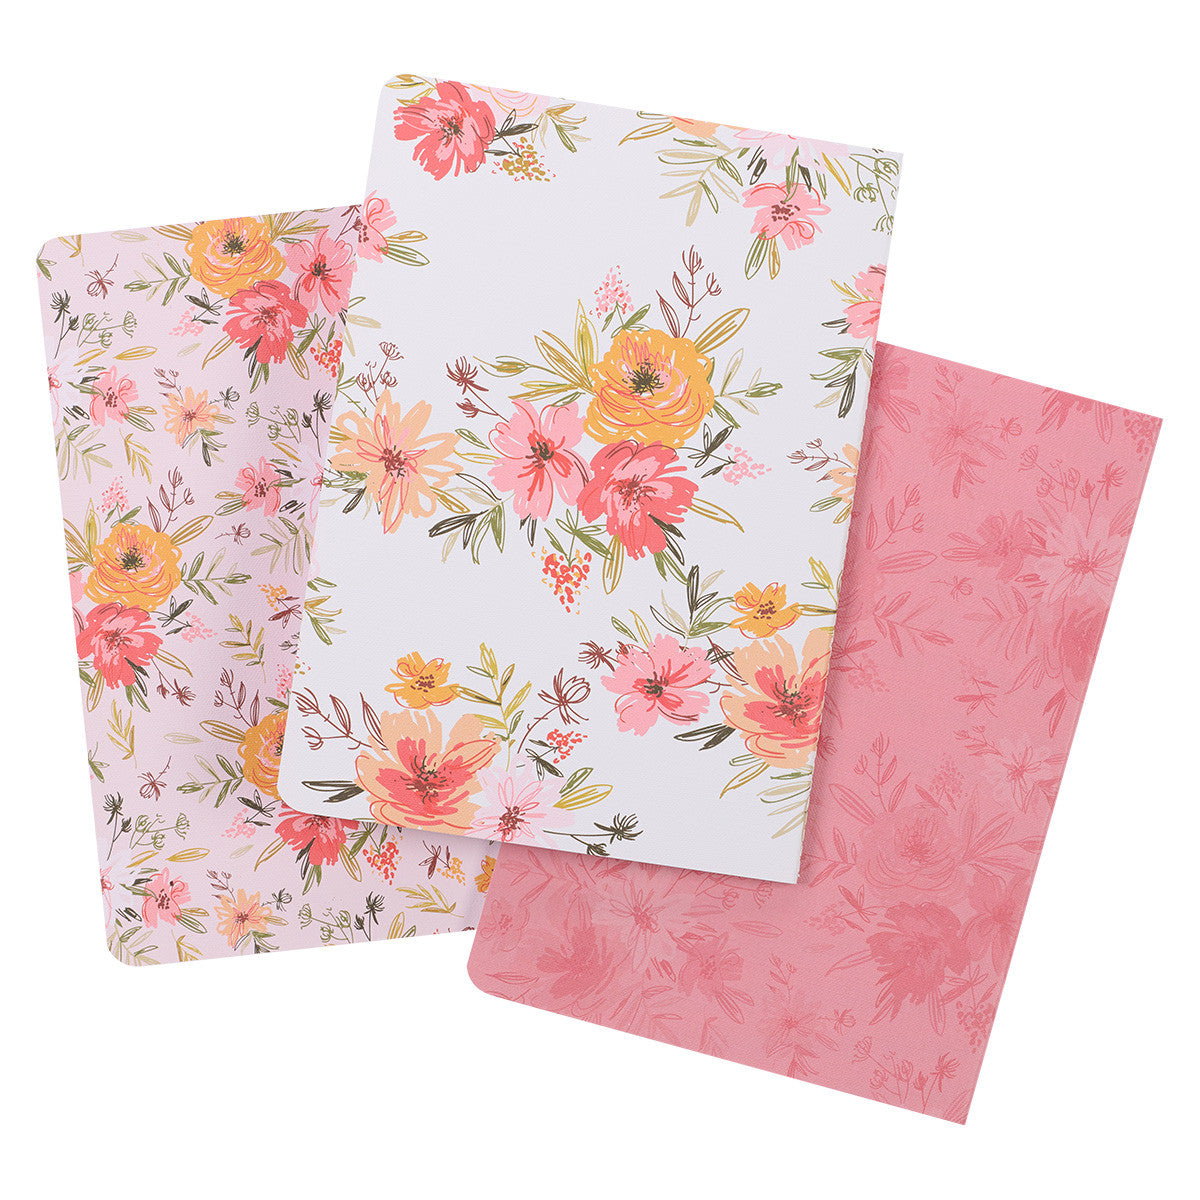 Walk by Faith Berry Pink Floral Large Notebook Set - 2 Corinthians 5:7 - The Christian Gift Company